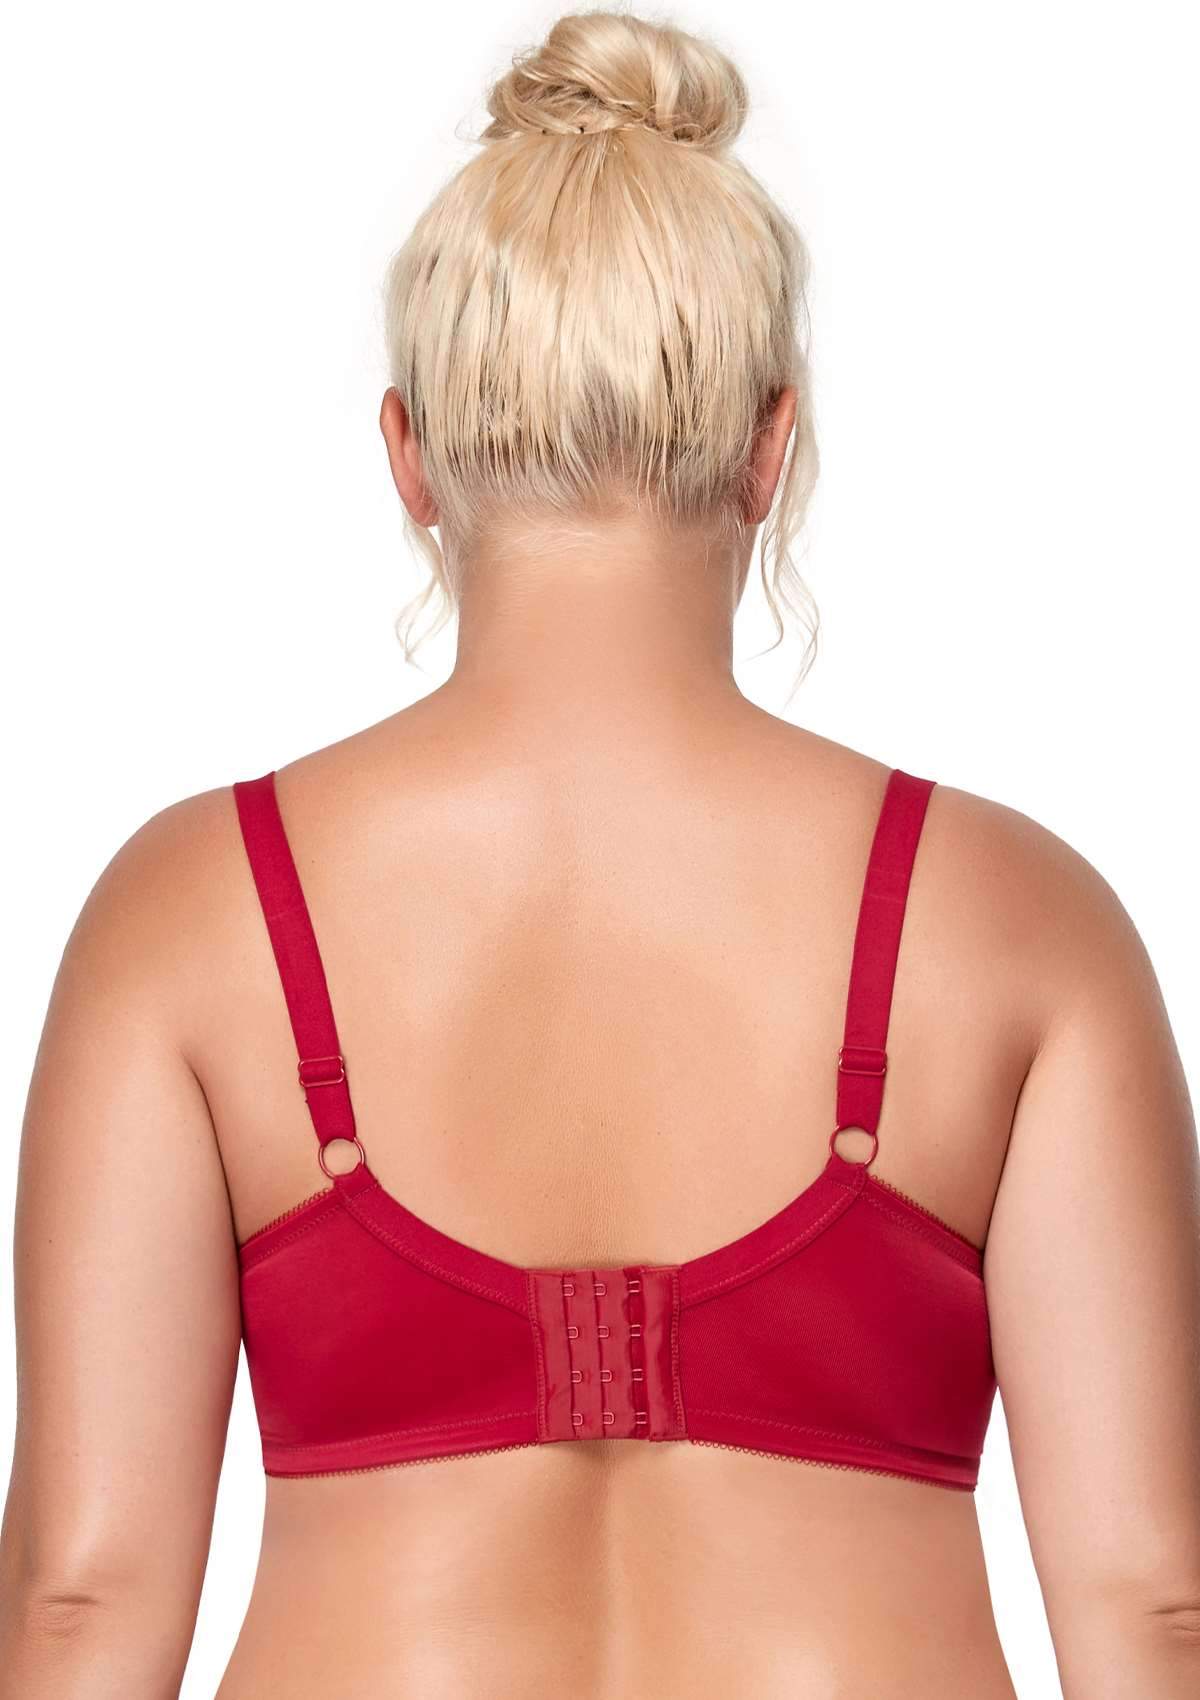 HSIA Enchante Full Support Lace Underwire Bra: Ideal For Big Breasts - Red / 34 / C